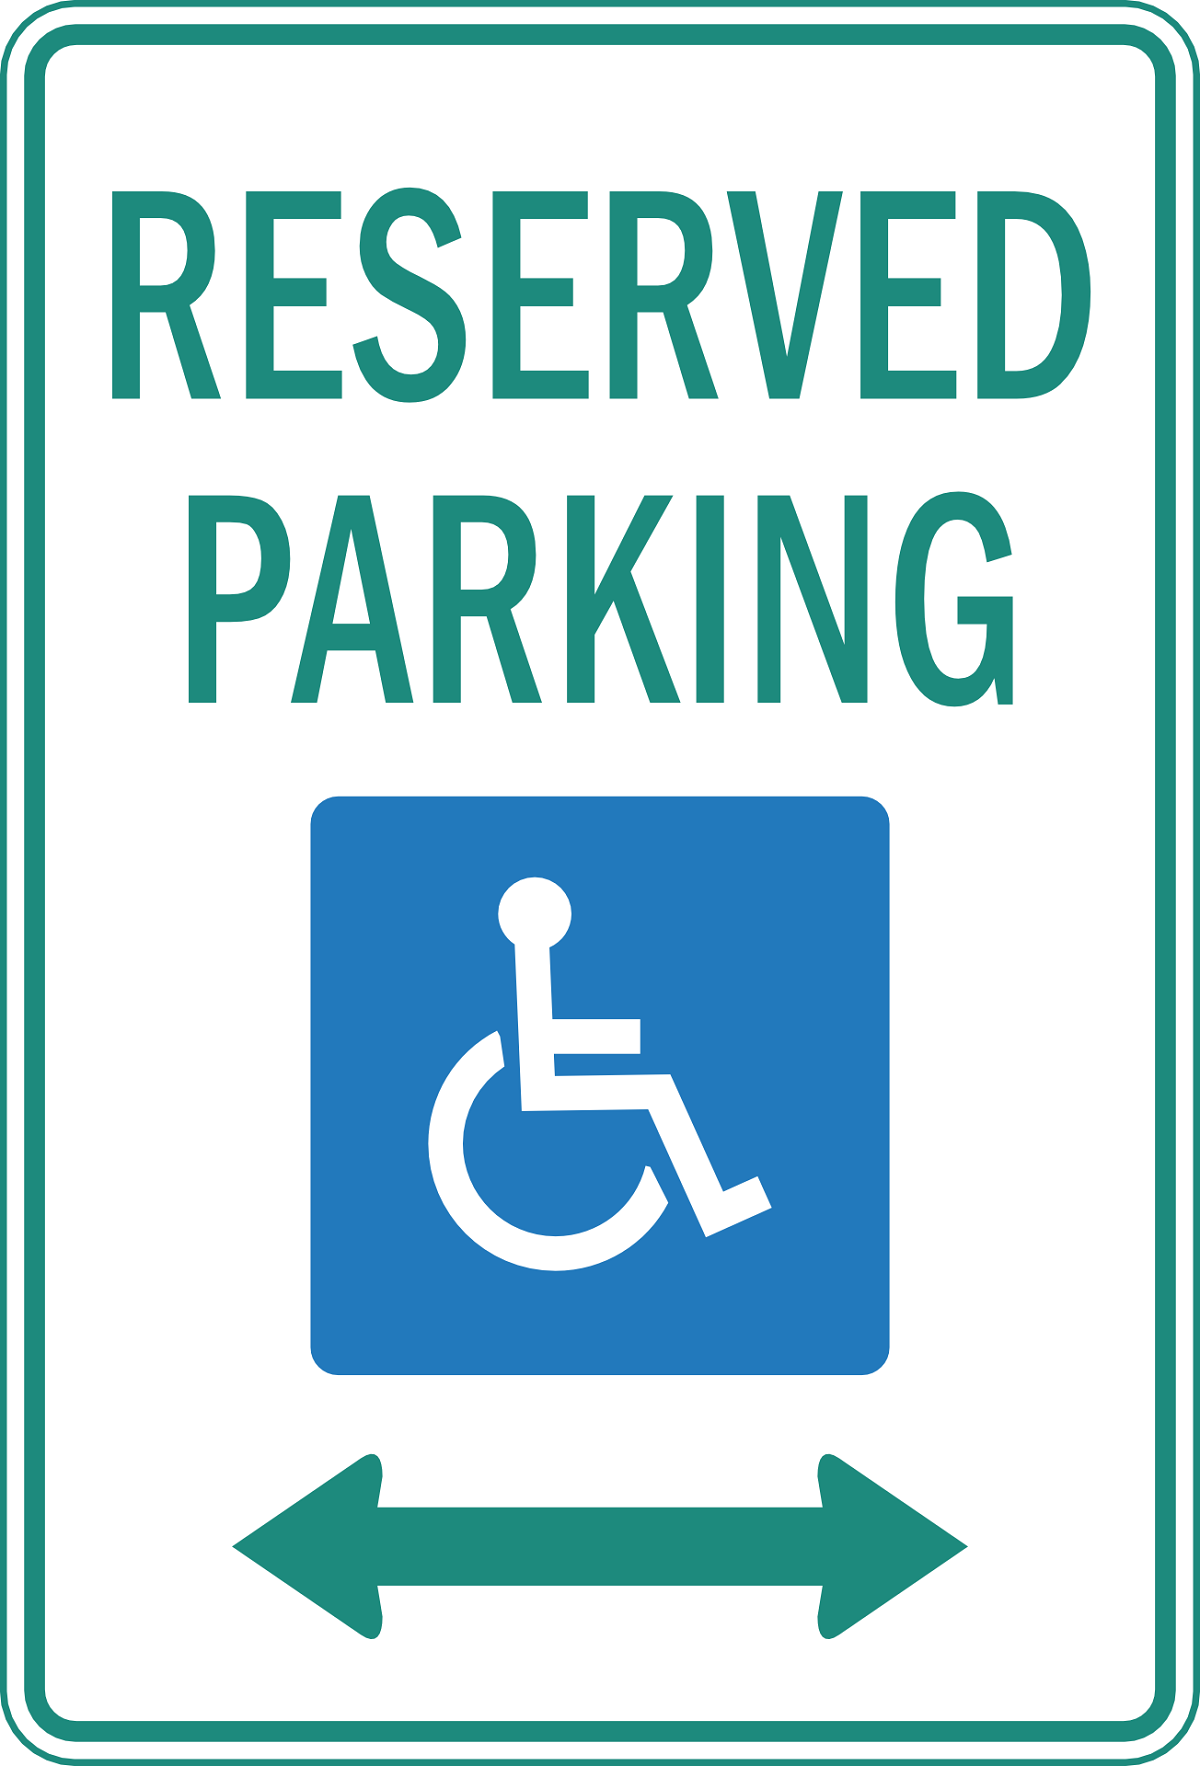 Reserved Parking | Hippo.co.za